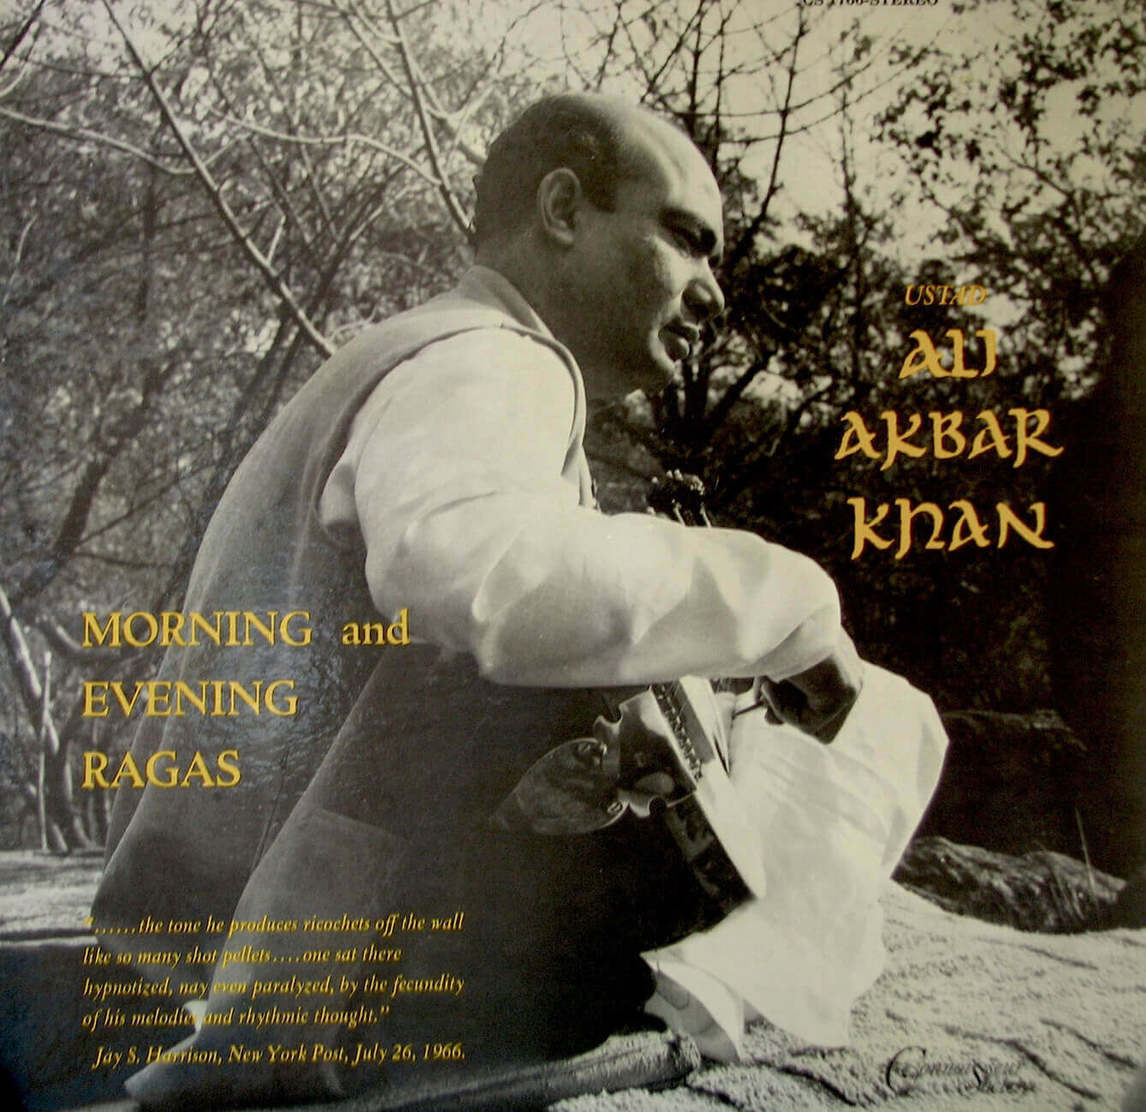 Art Canada Institute, Album cover for Morning and Evening Ragas by Ali Akbar Khan